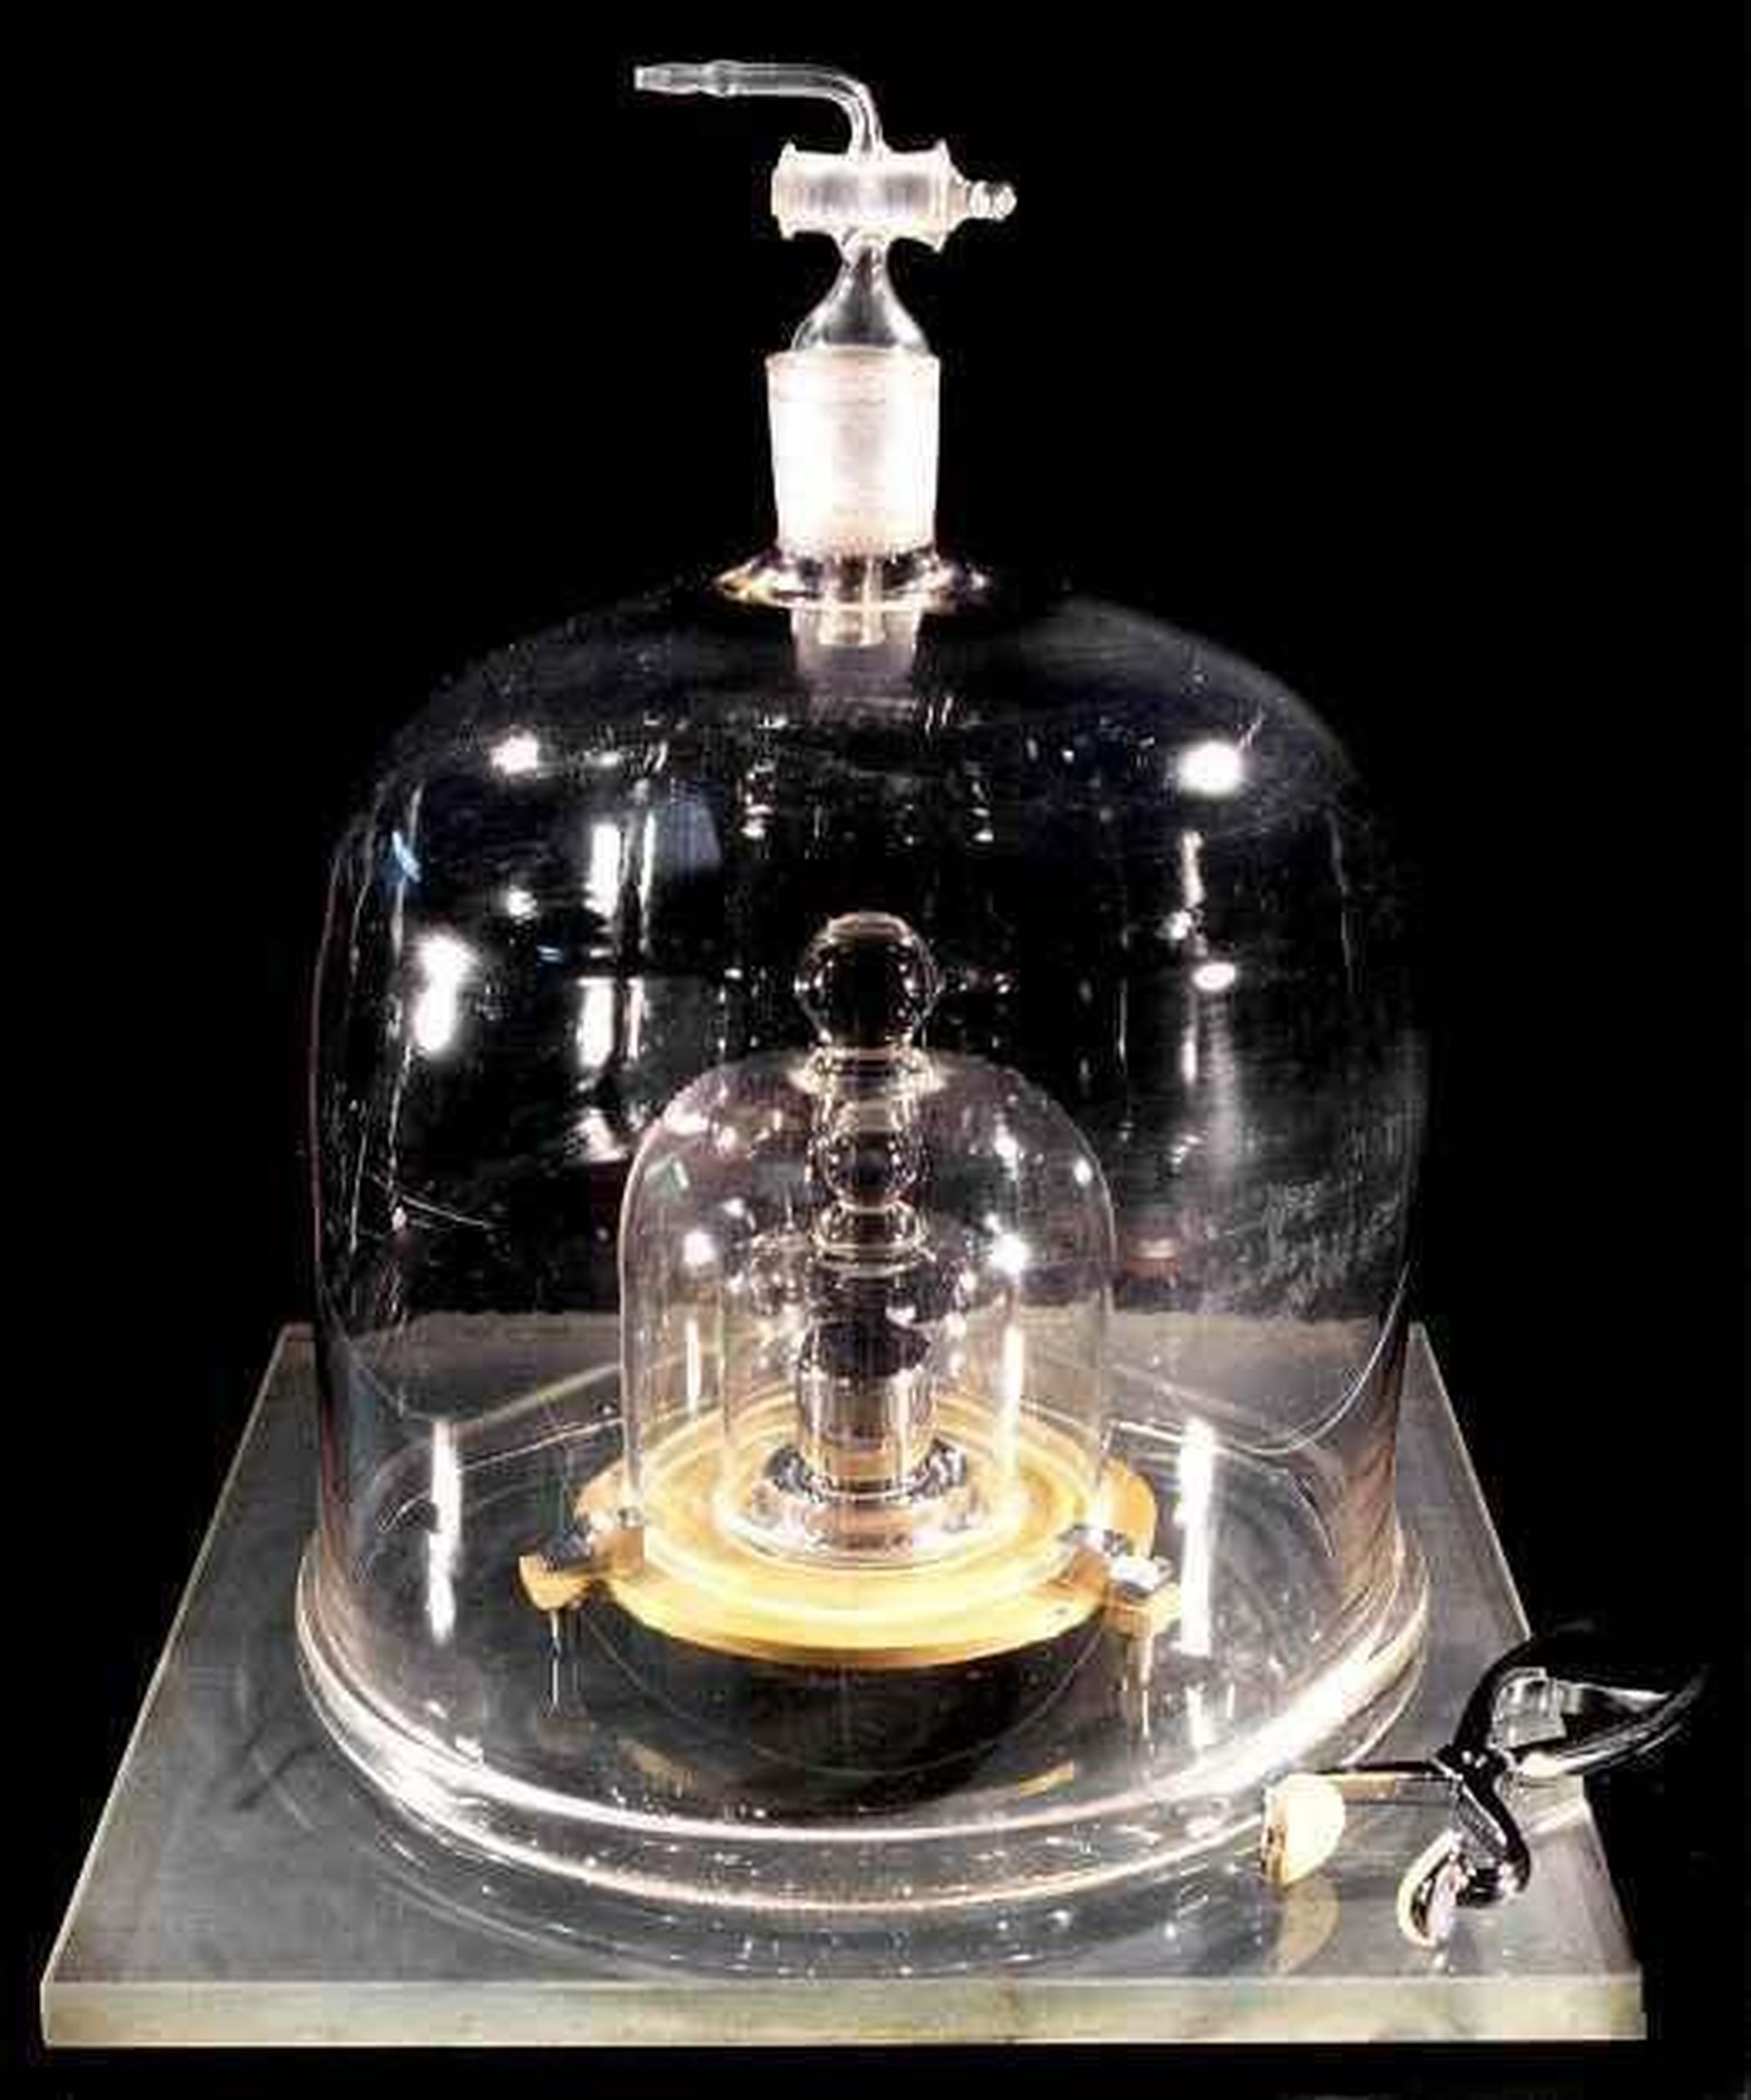 After 129 years, the world started using a more accurate measurement of a kilogram.